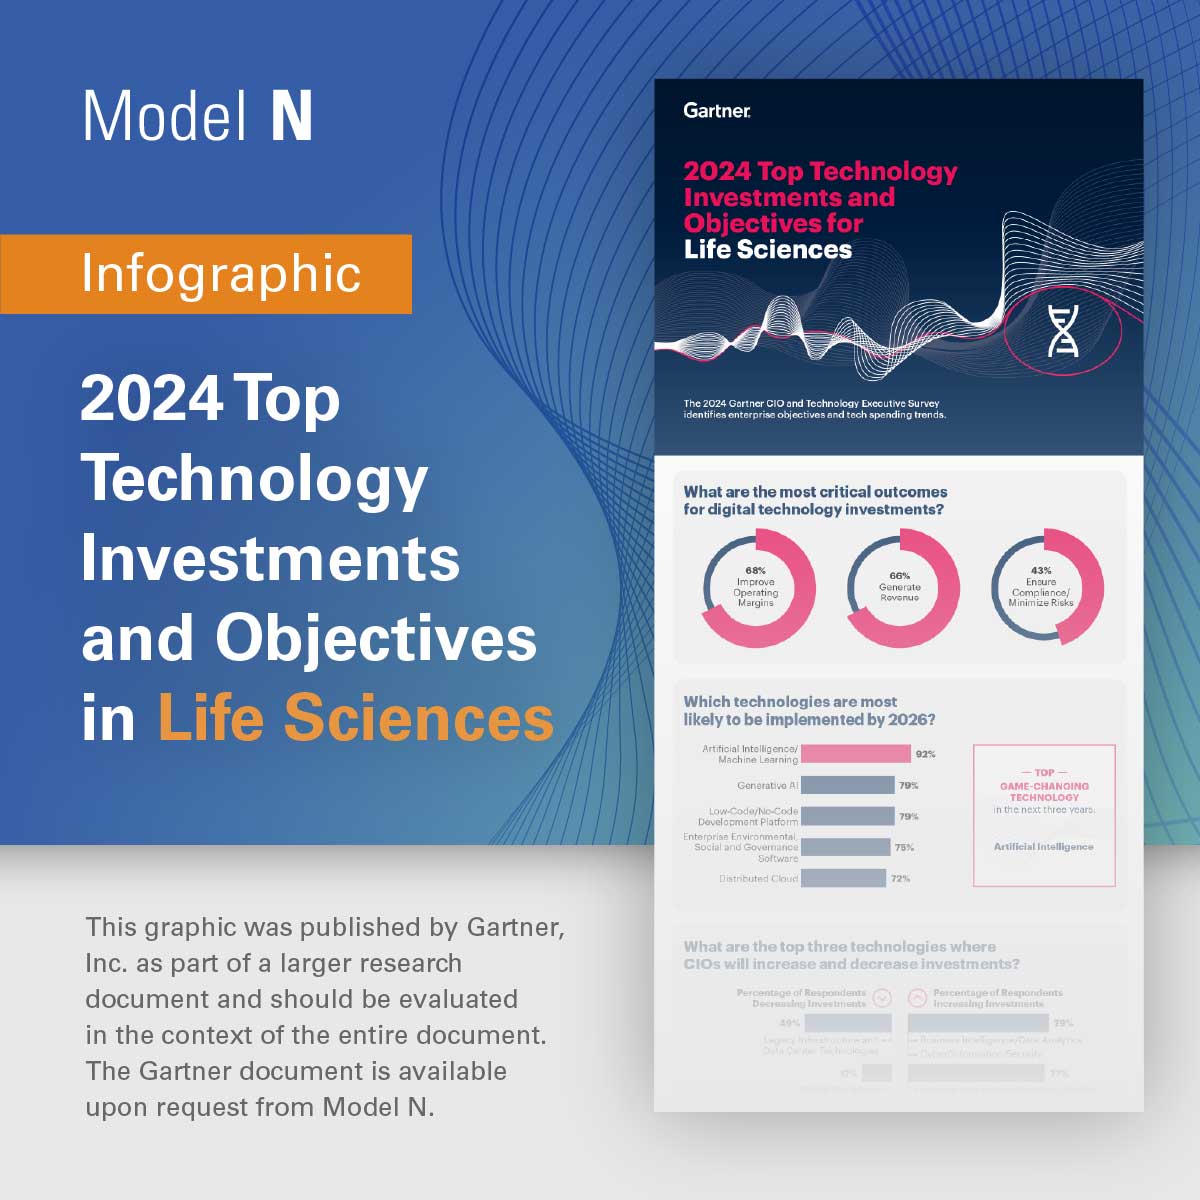 infographic illustrating the top technology investments and objectives for life sciences in 2024